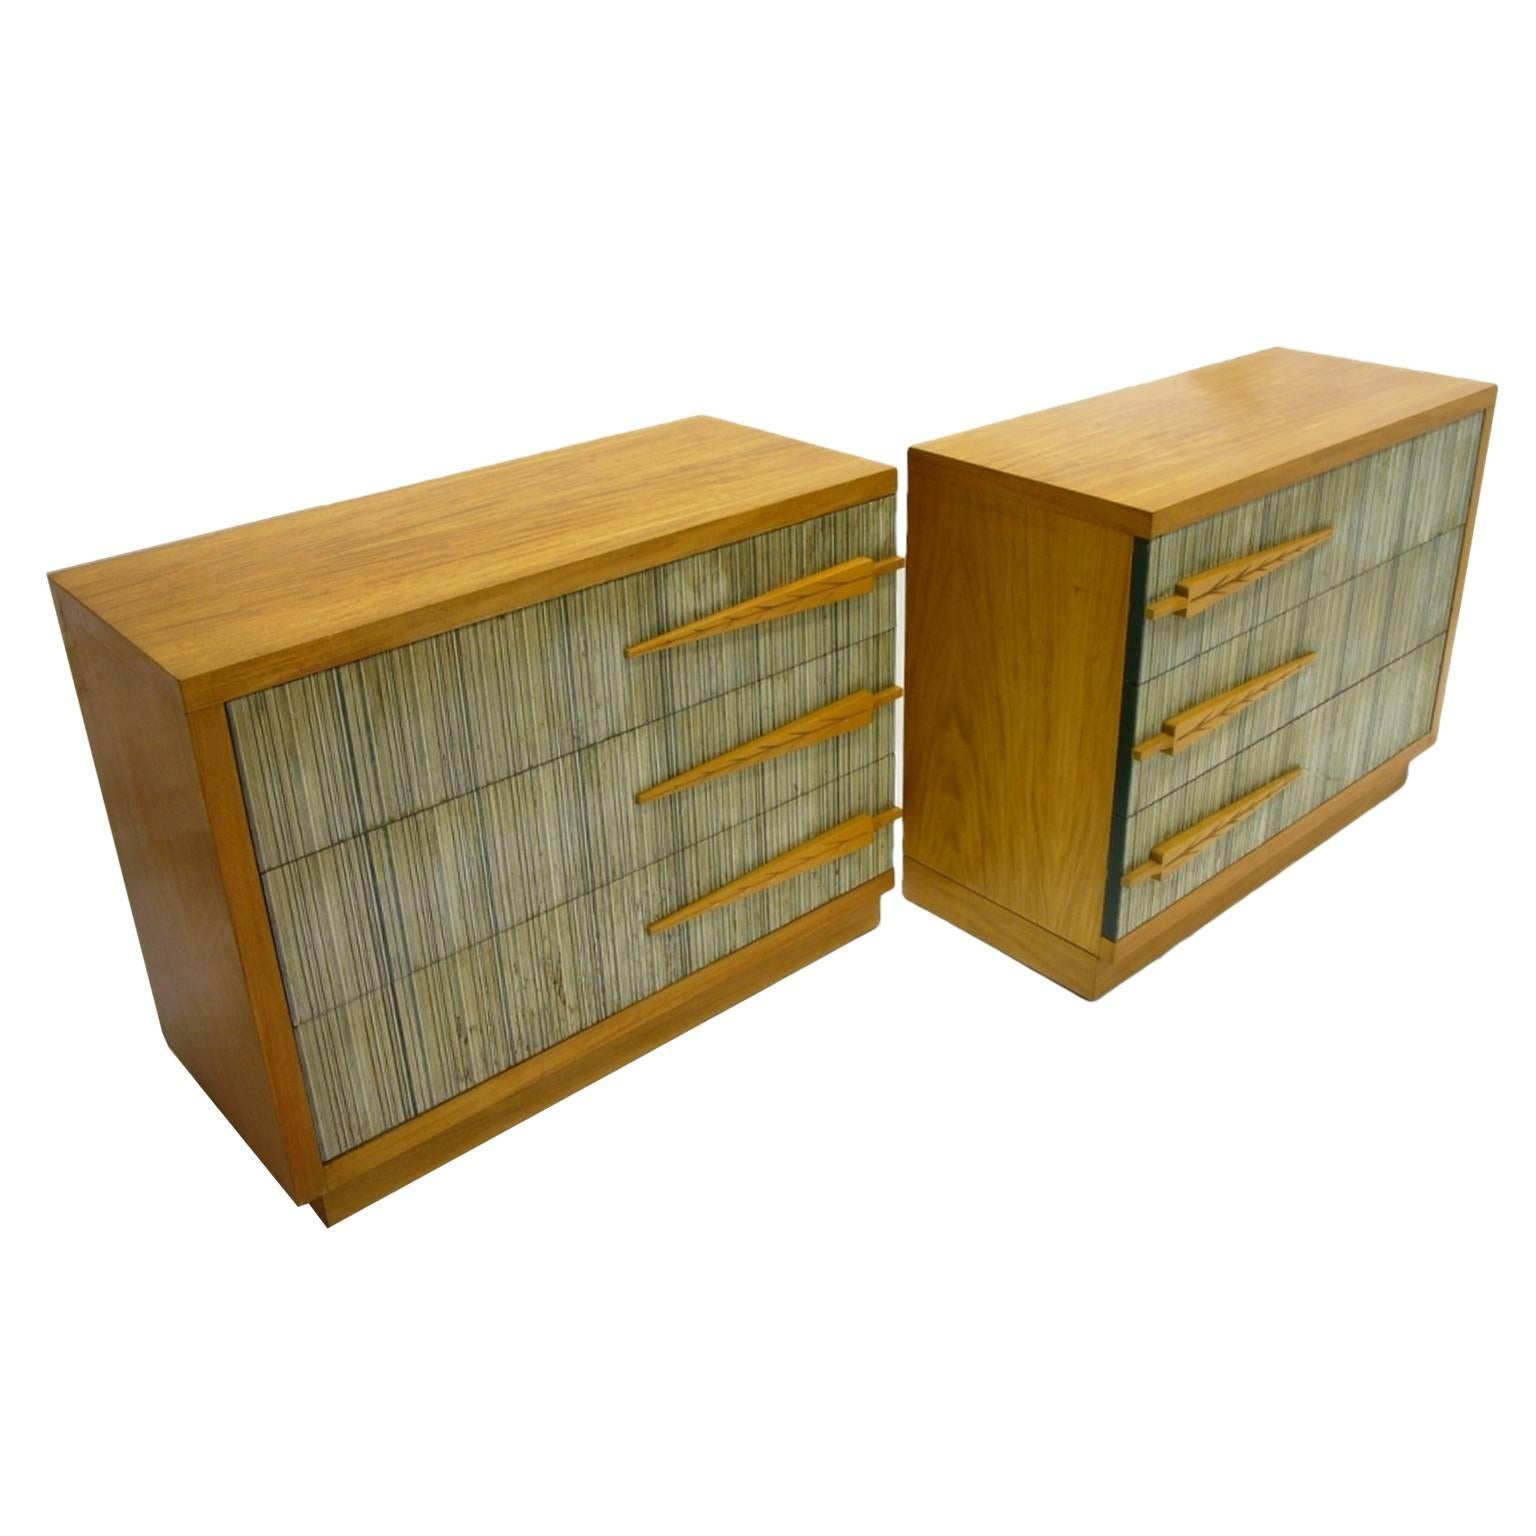 American Pair of Mirror Image Dressers with Combed Wood Detail by Modernage